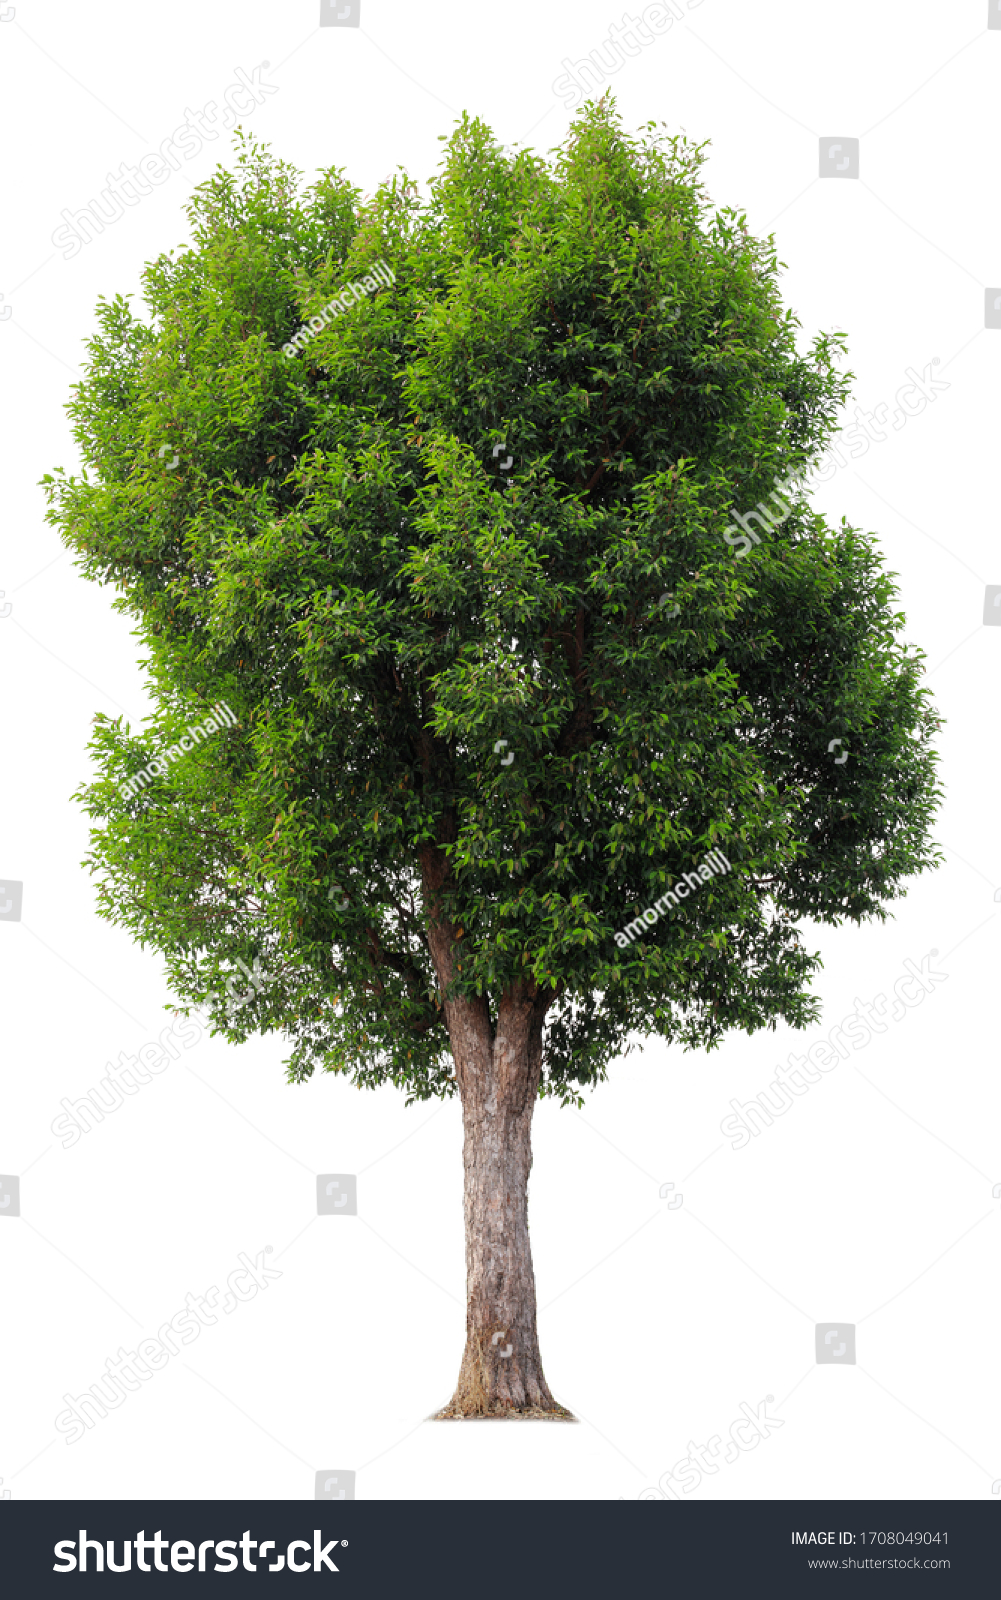 Cutout tree for use as a raw material for editing work. isolated beautiful fresh green deciduous almond tree on white background with clipping path. #1708049041